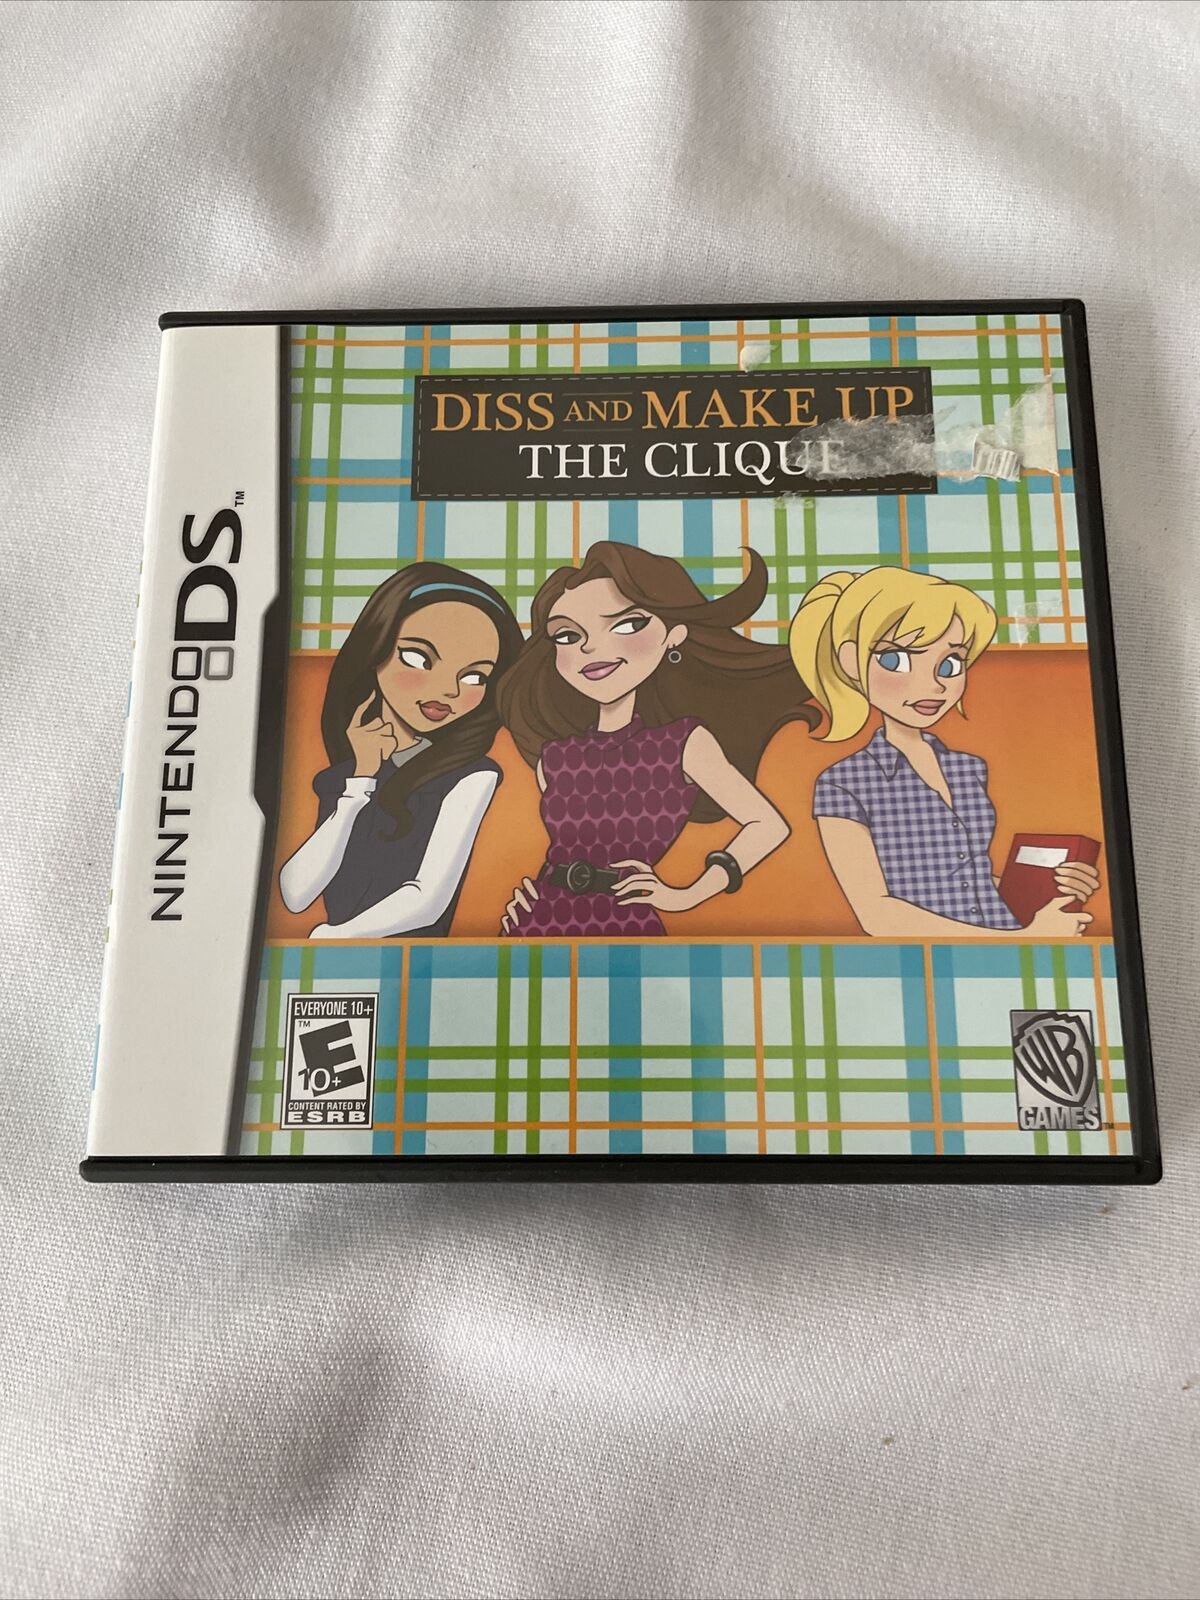 Clique: Diss and Make Up (Nintendo DS, 2009) With Manual